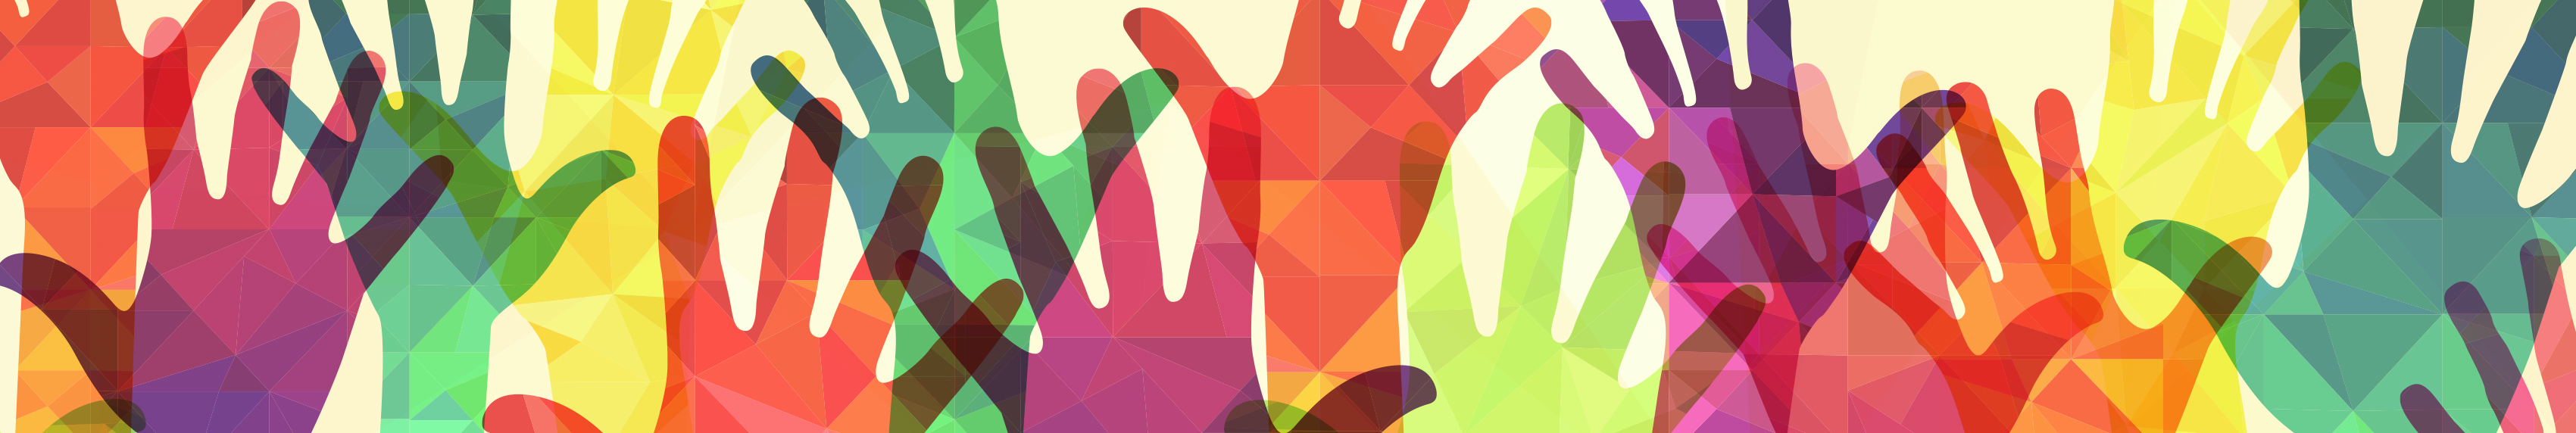 image of coloured hands